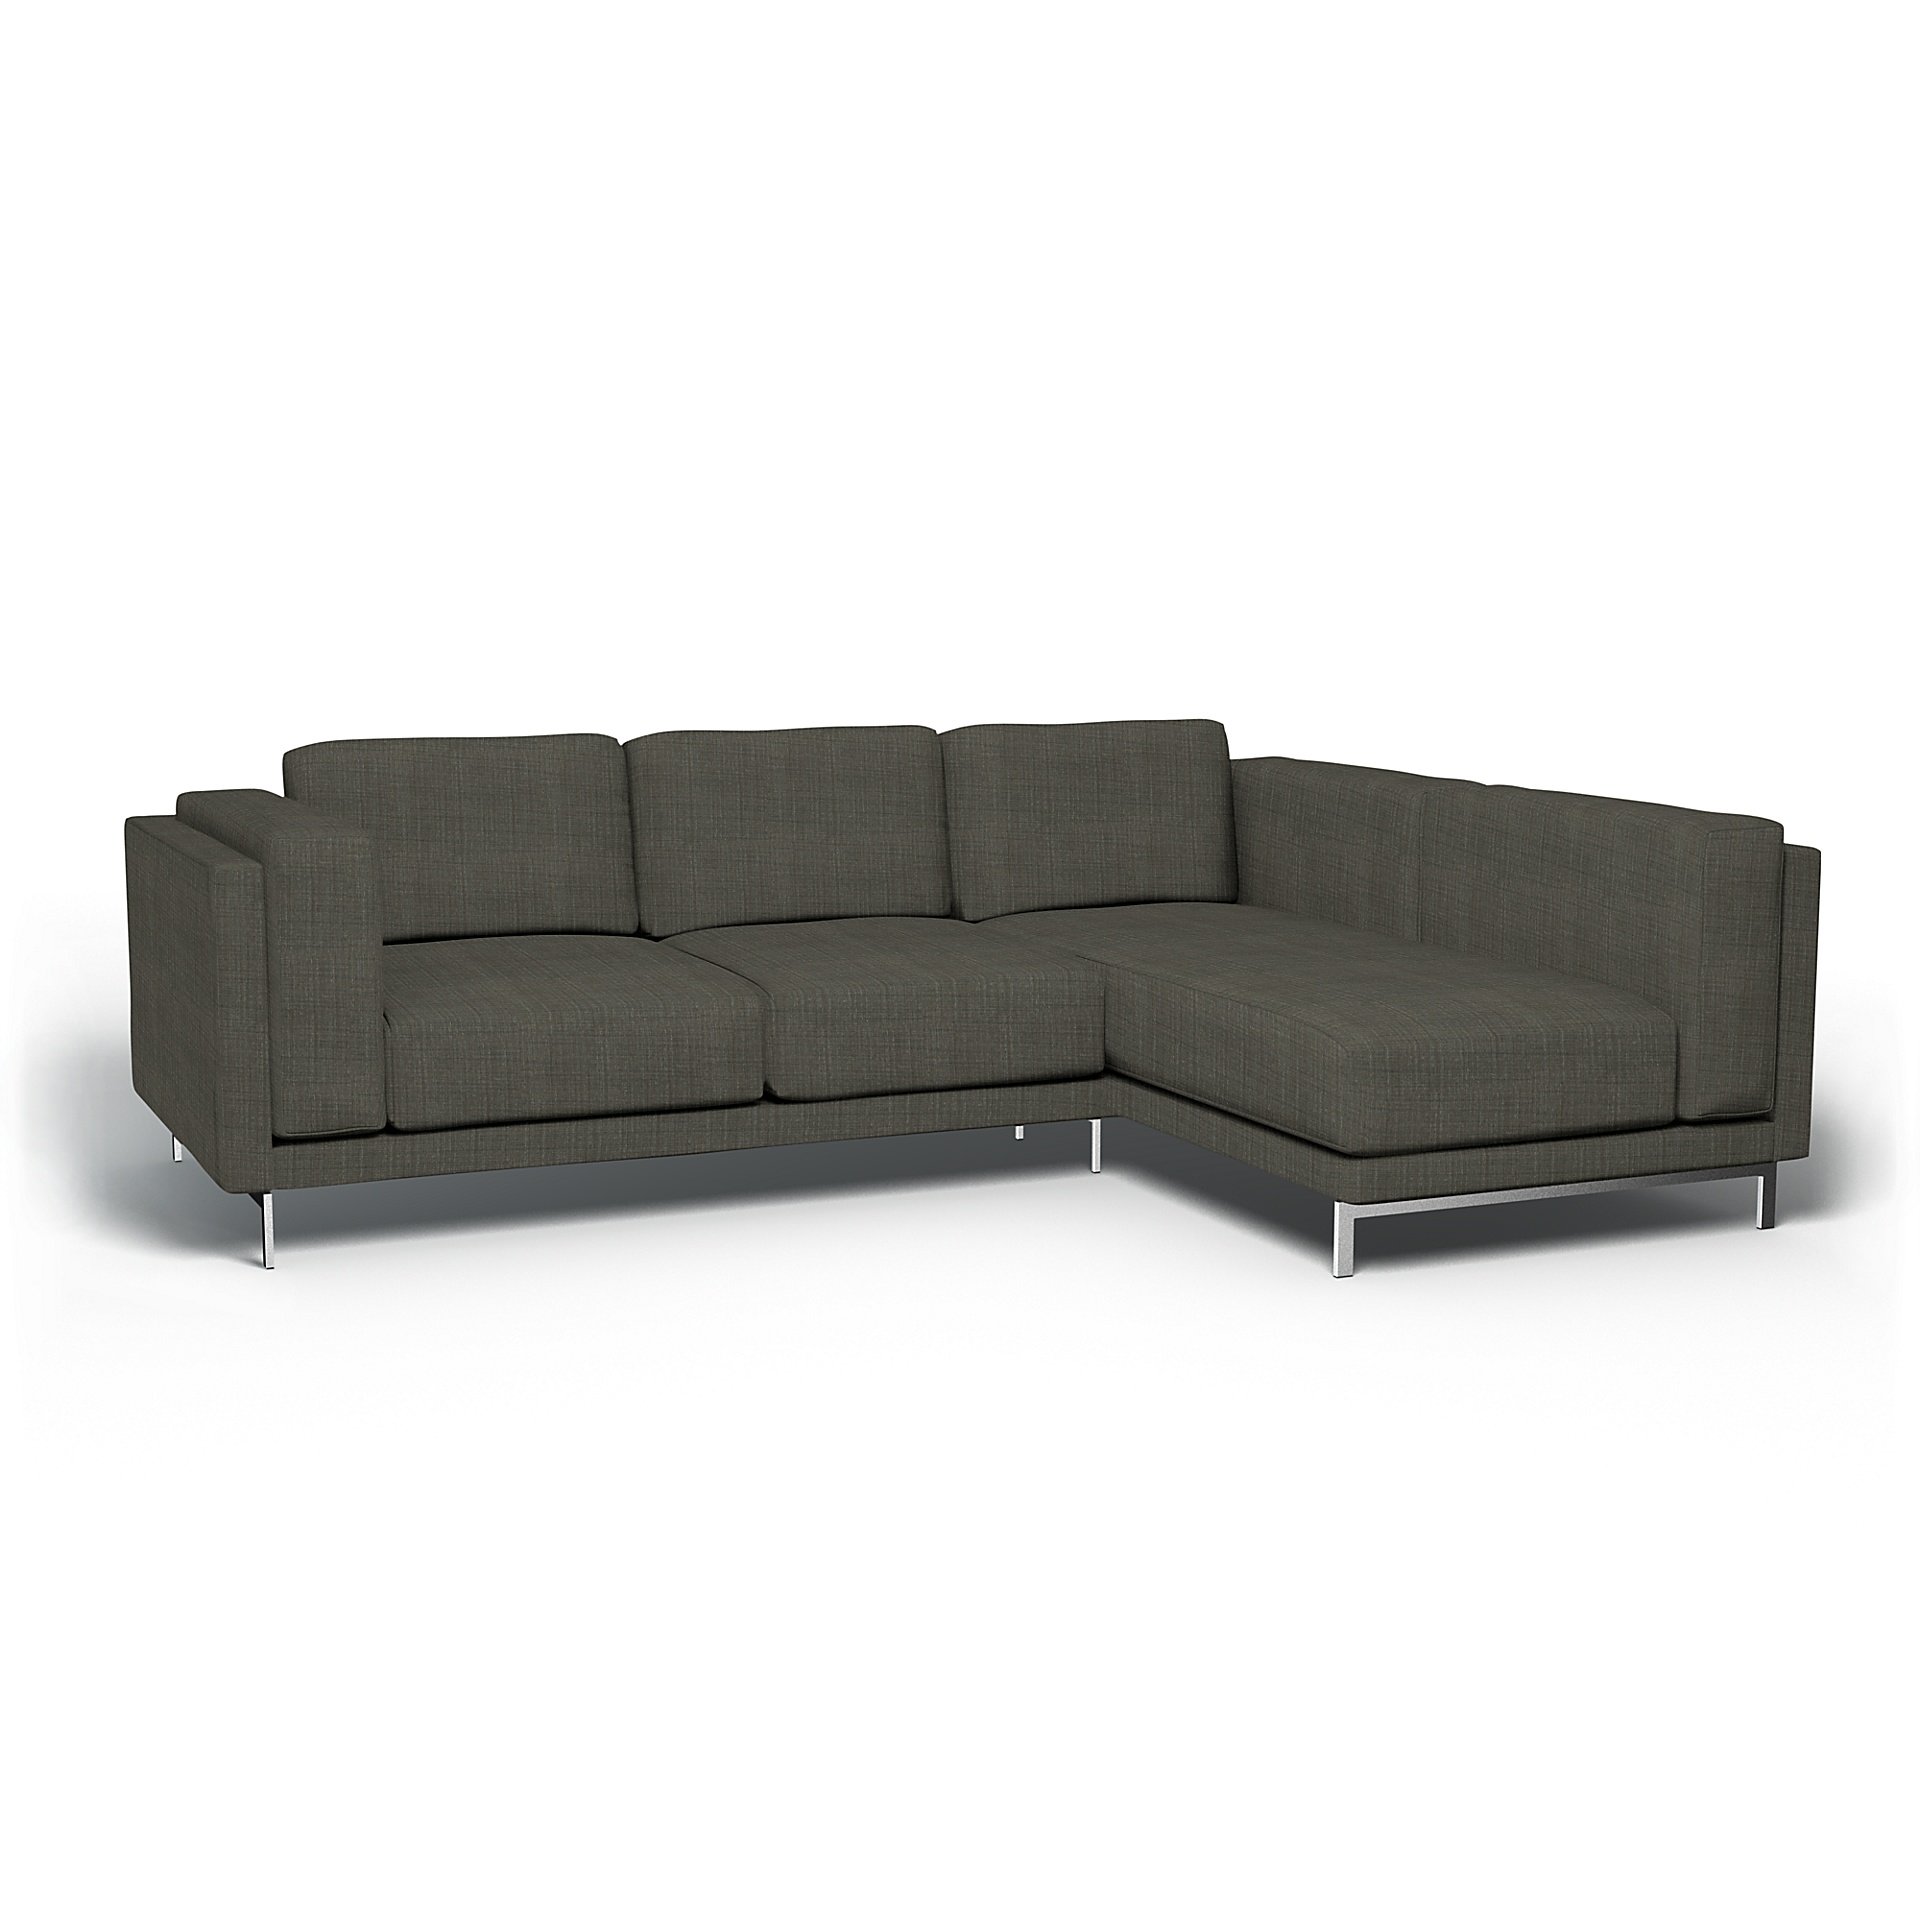 IKEA - Nockeby 3 Seat Sofa with Right Chaise Cover, Mole Brown, Boucle & Texture - Bemz